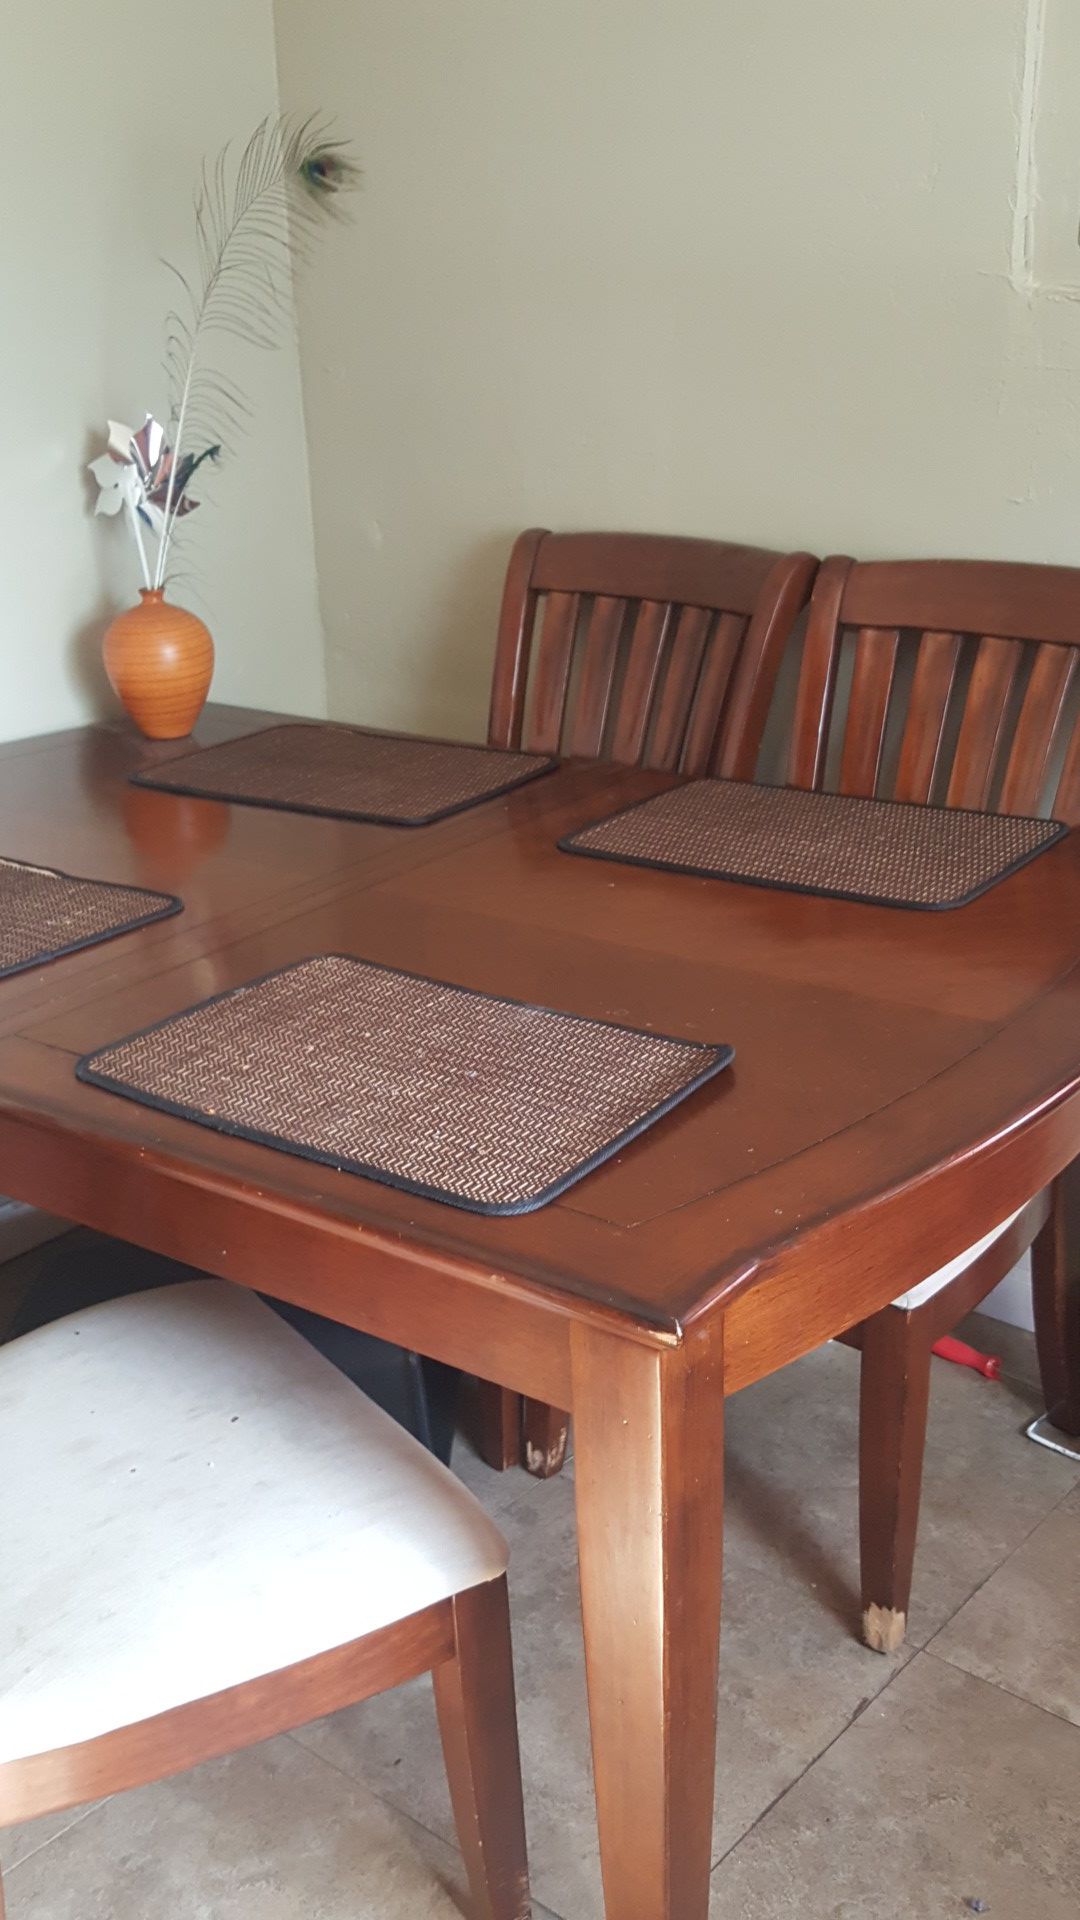 Solid wood kitchen table with extension